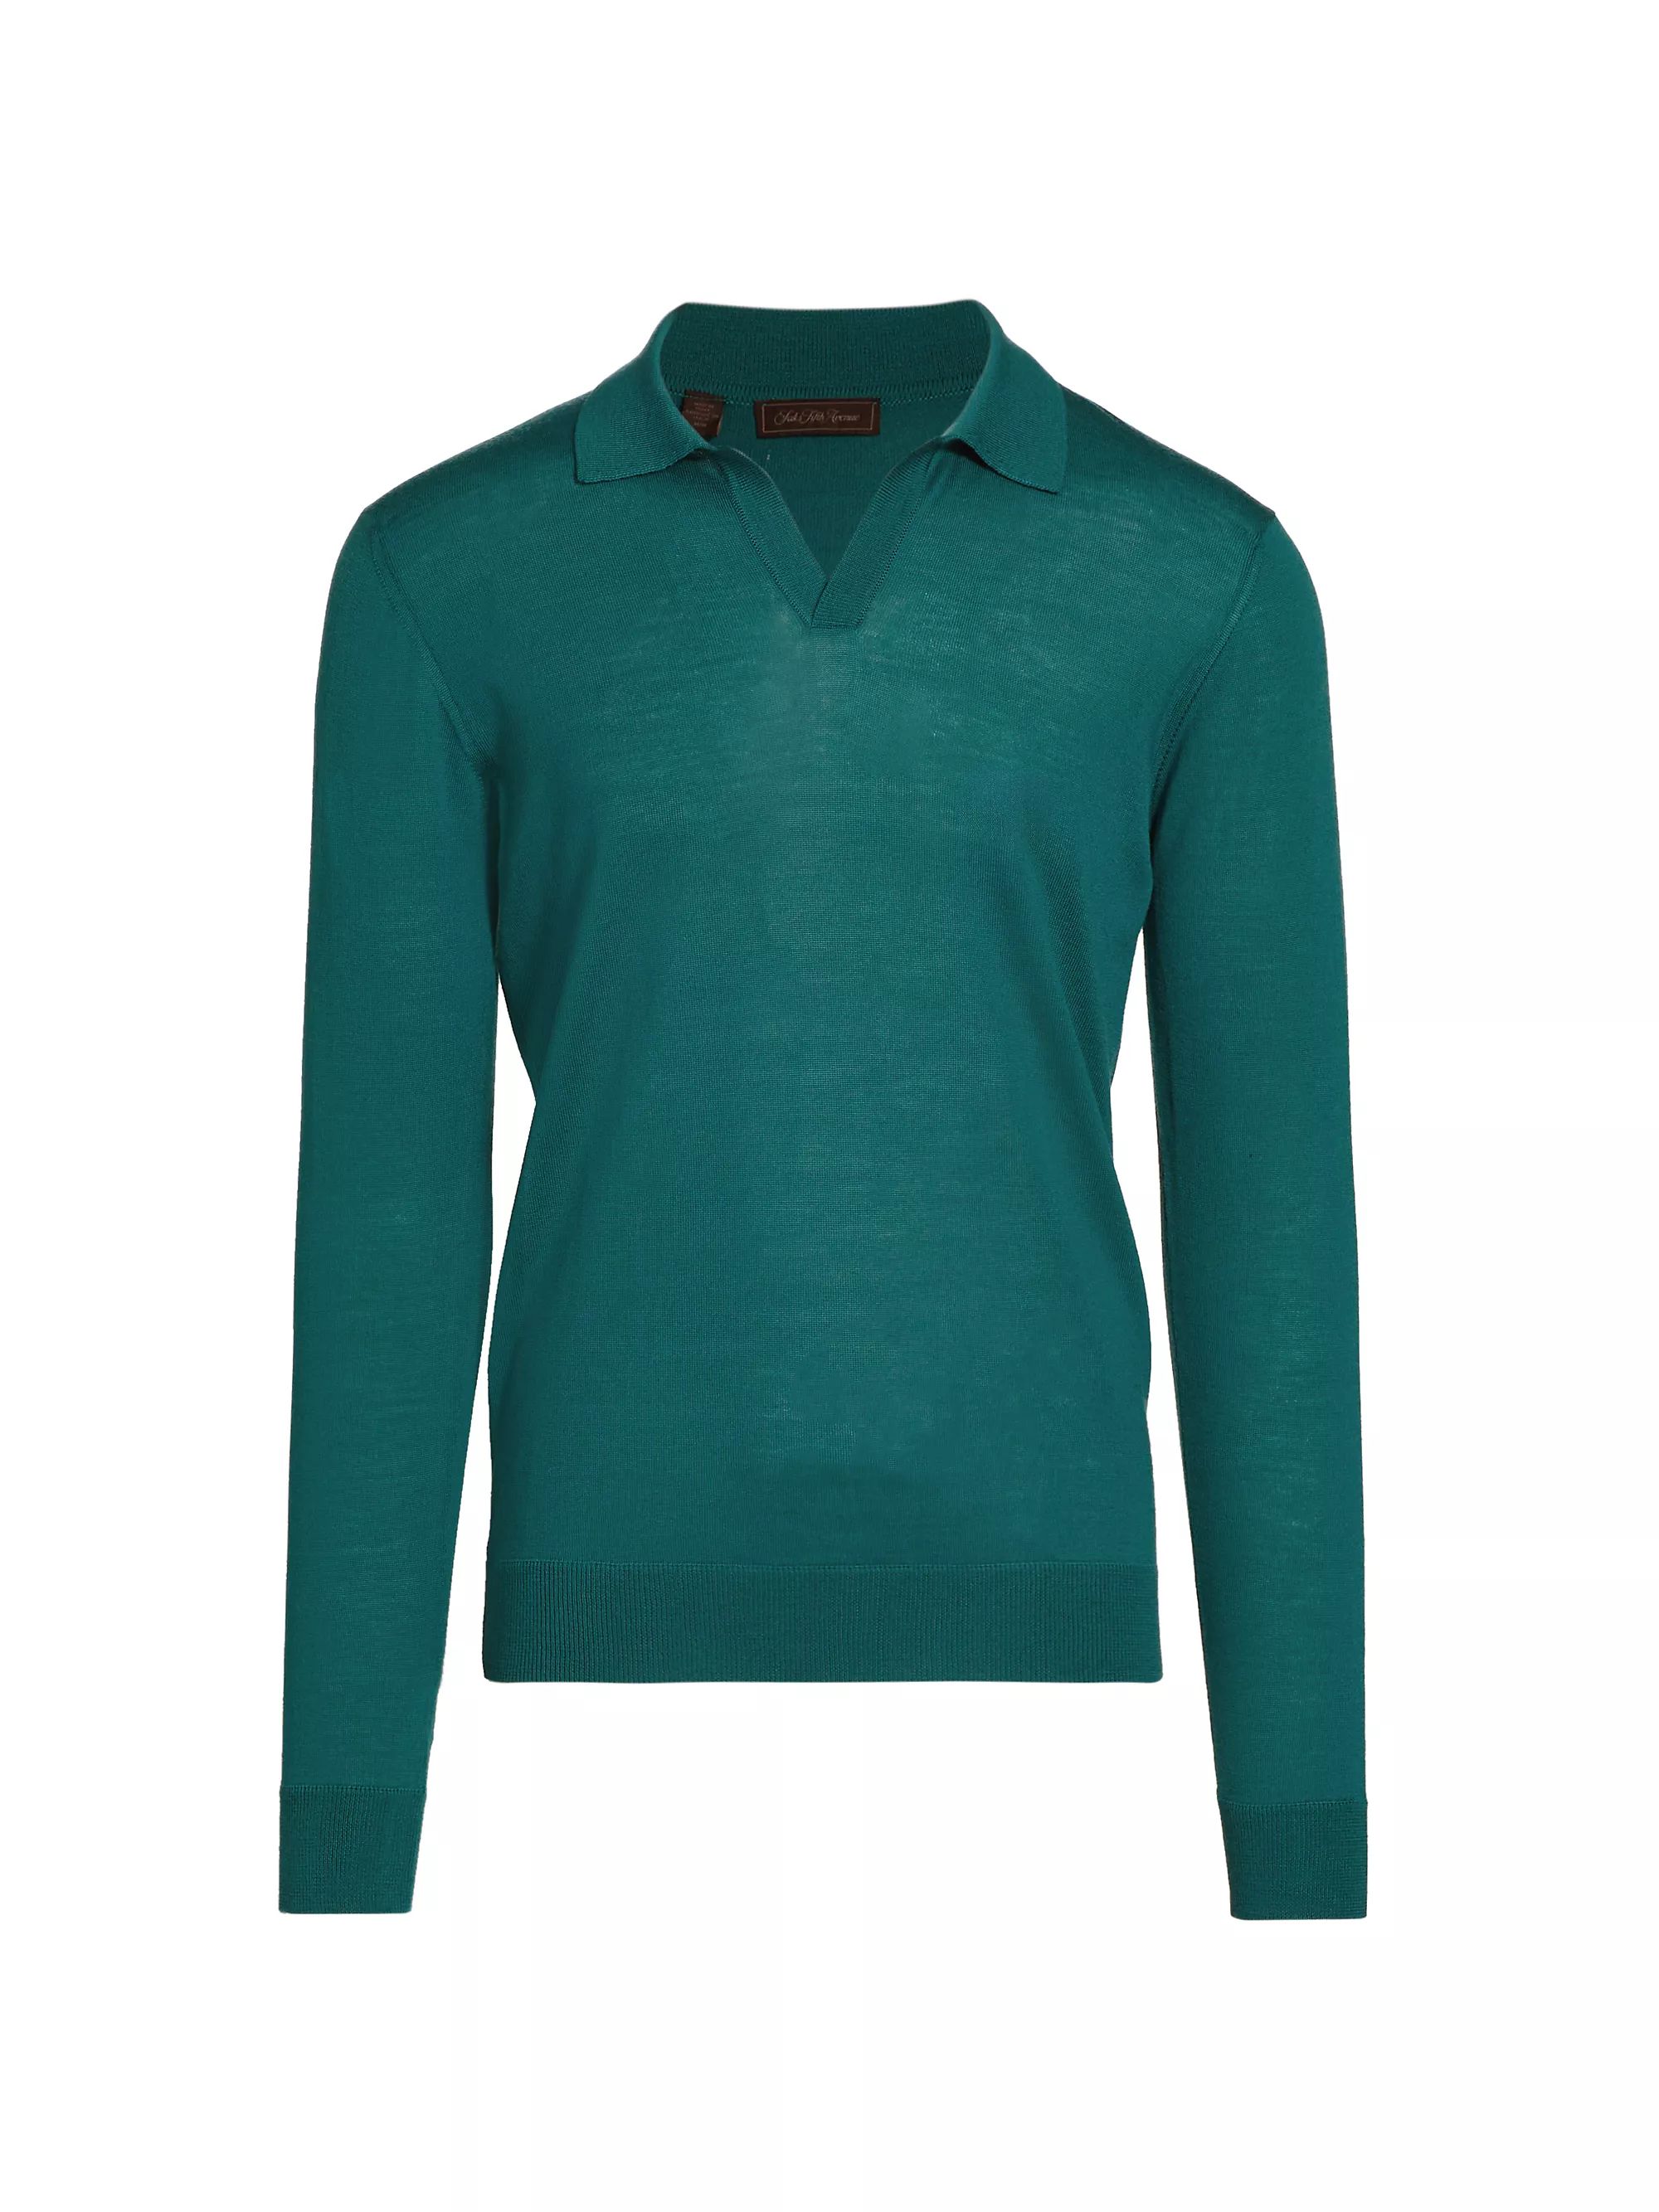 Shop Saks Fifth Avenue COLLECTION Long-Sleeve Johnny Collar Polo | Saks Fifth Avenue | Saks Fifth Avenue